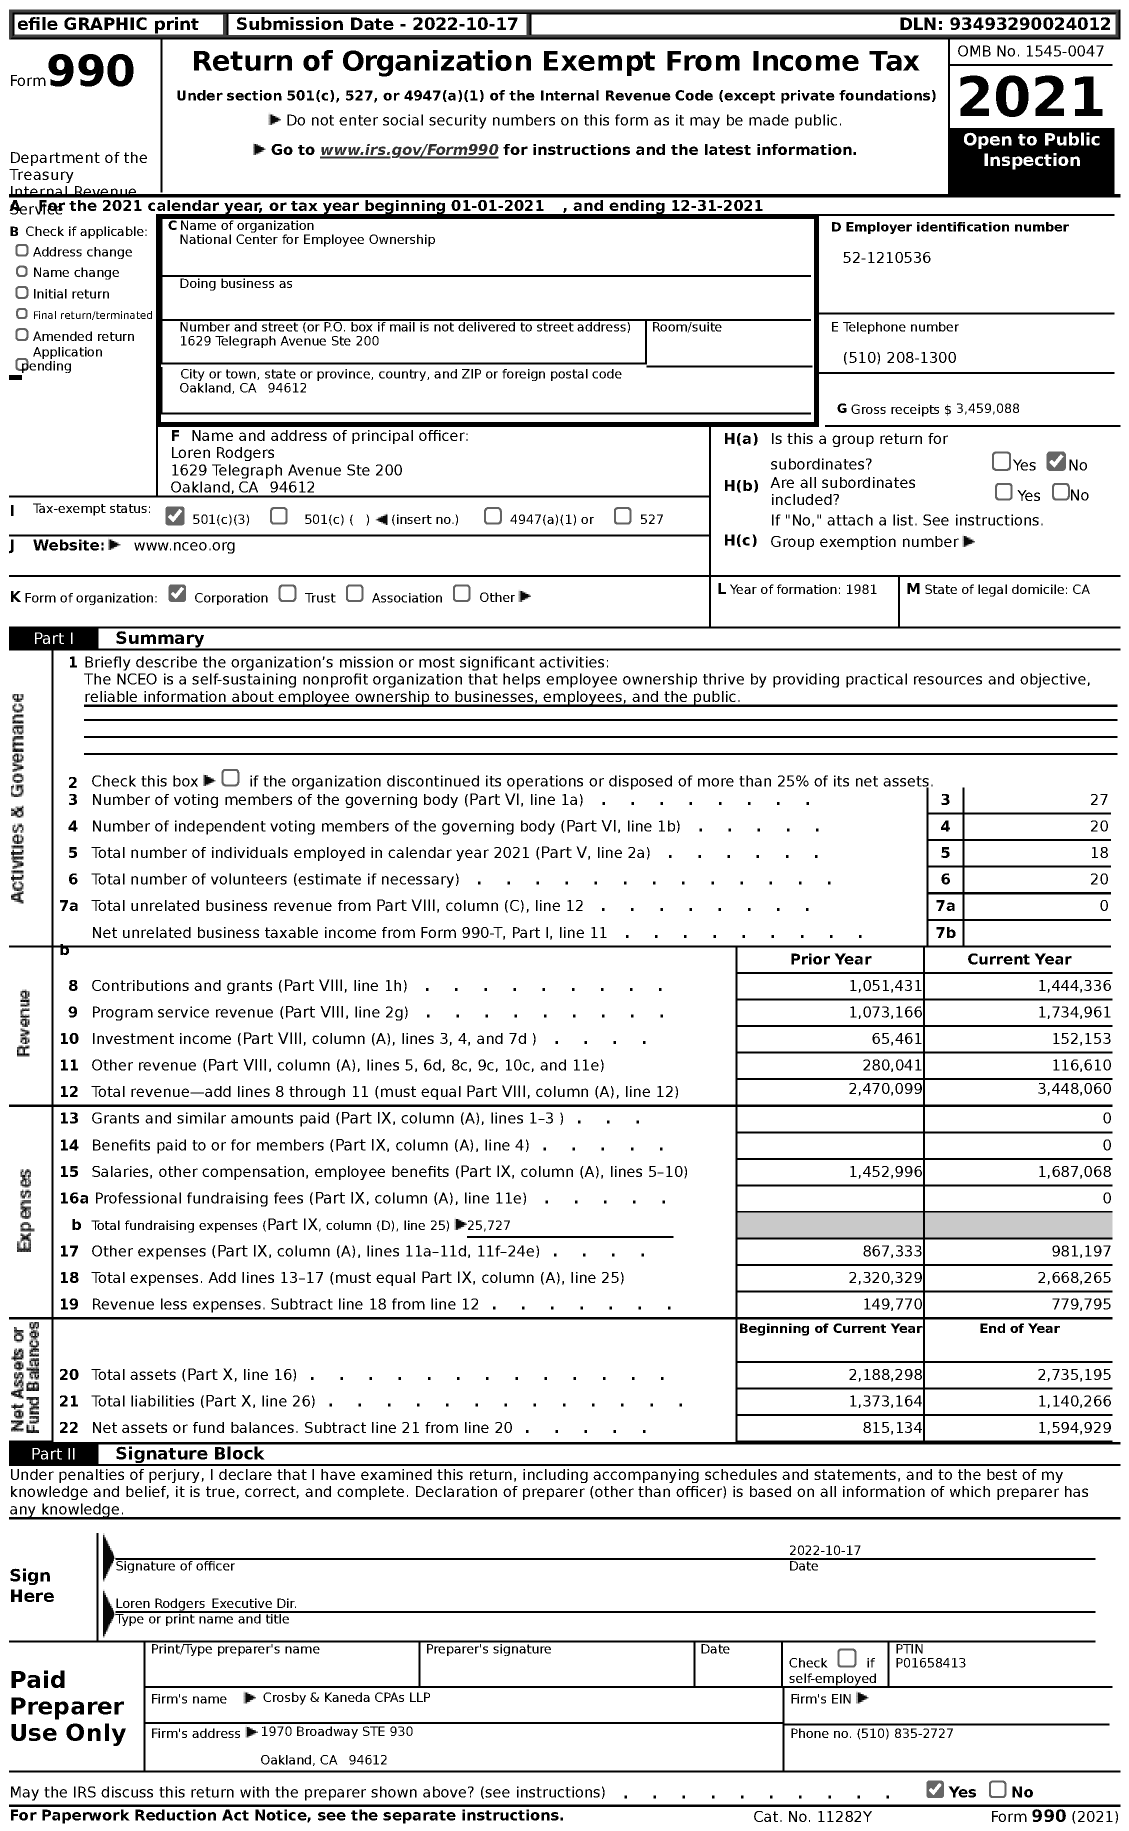 Image of first page of 2021 Form 990 for National Center for Employee Ownership